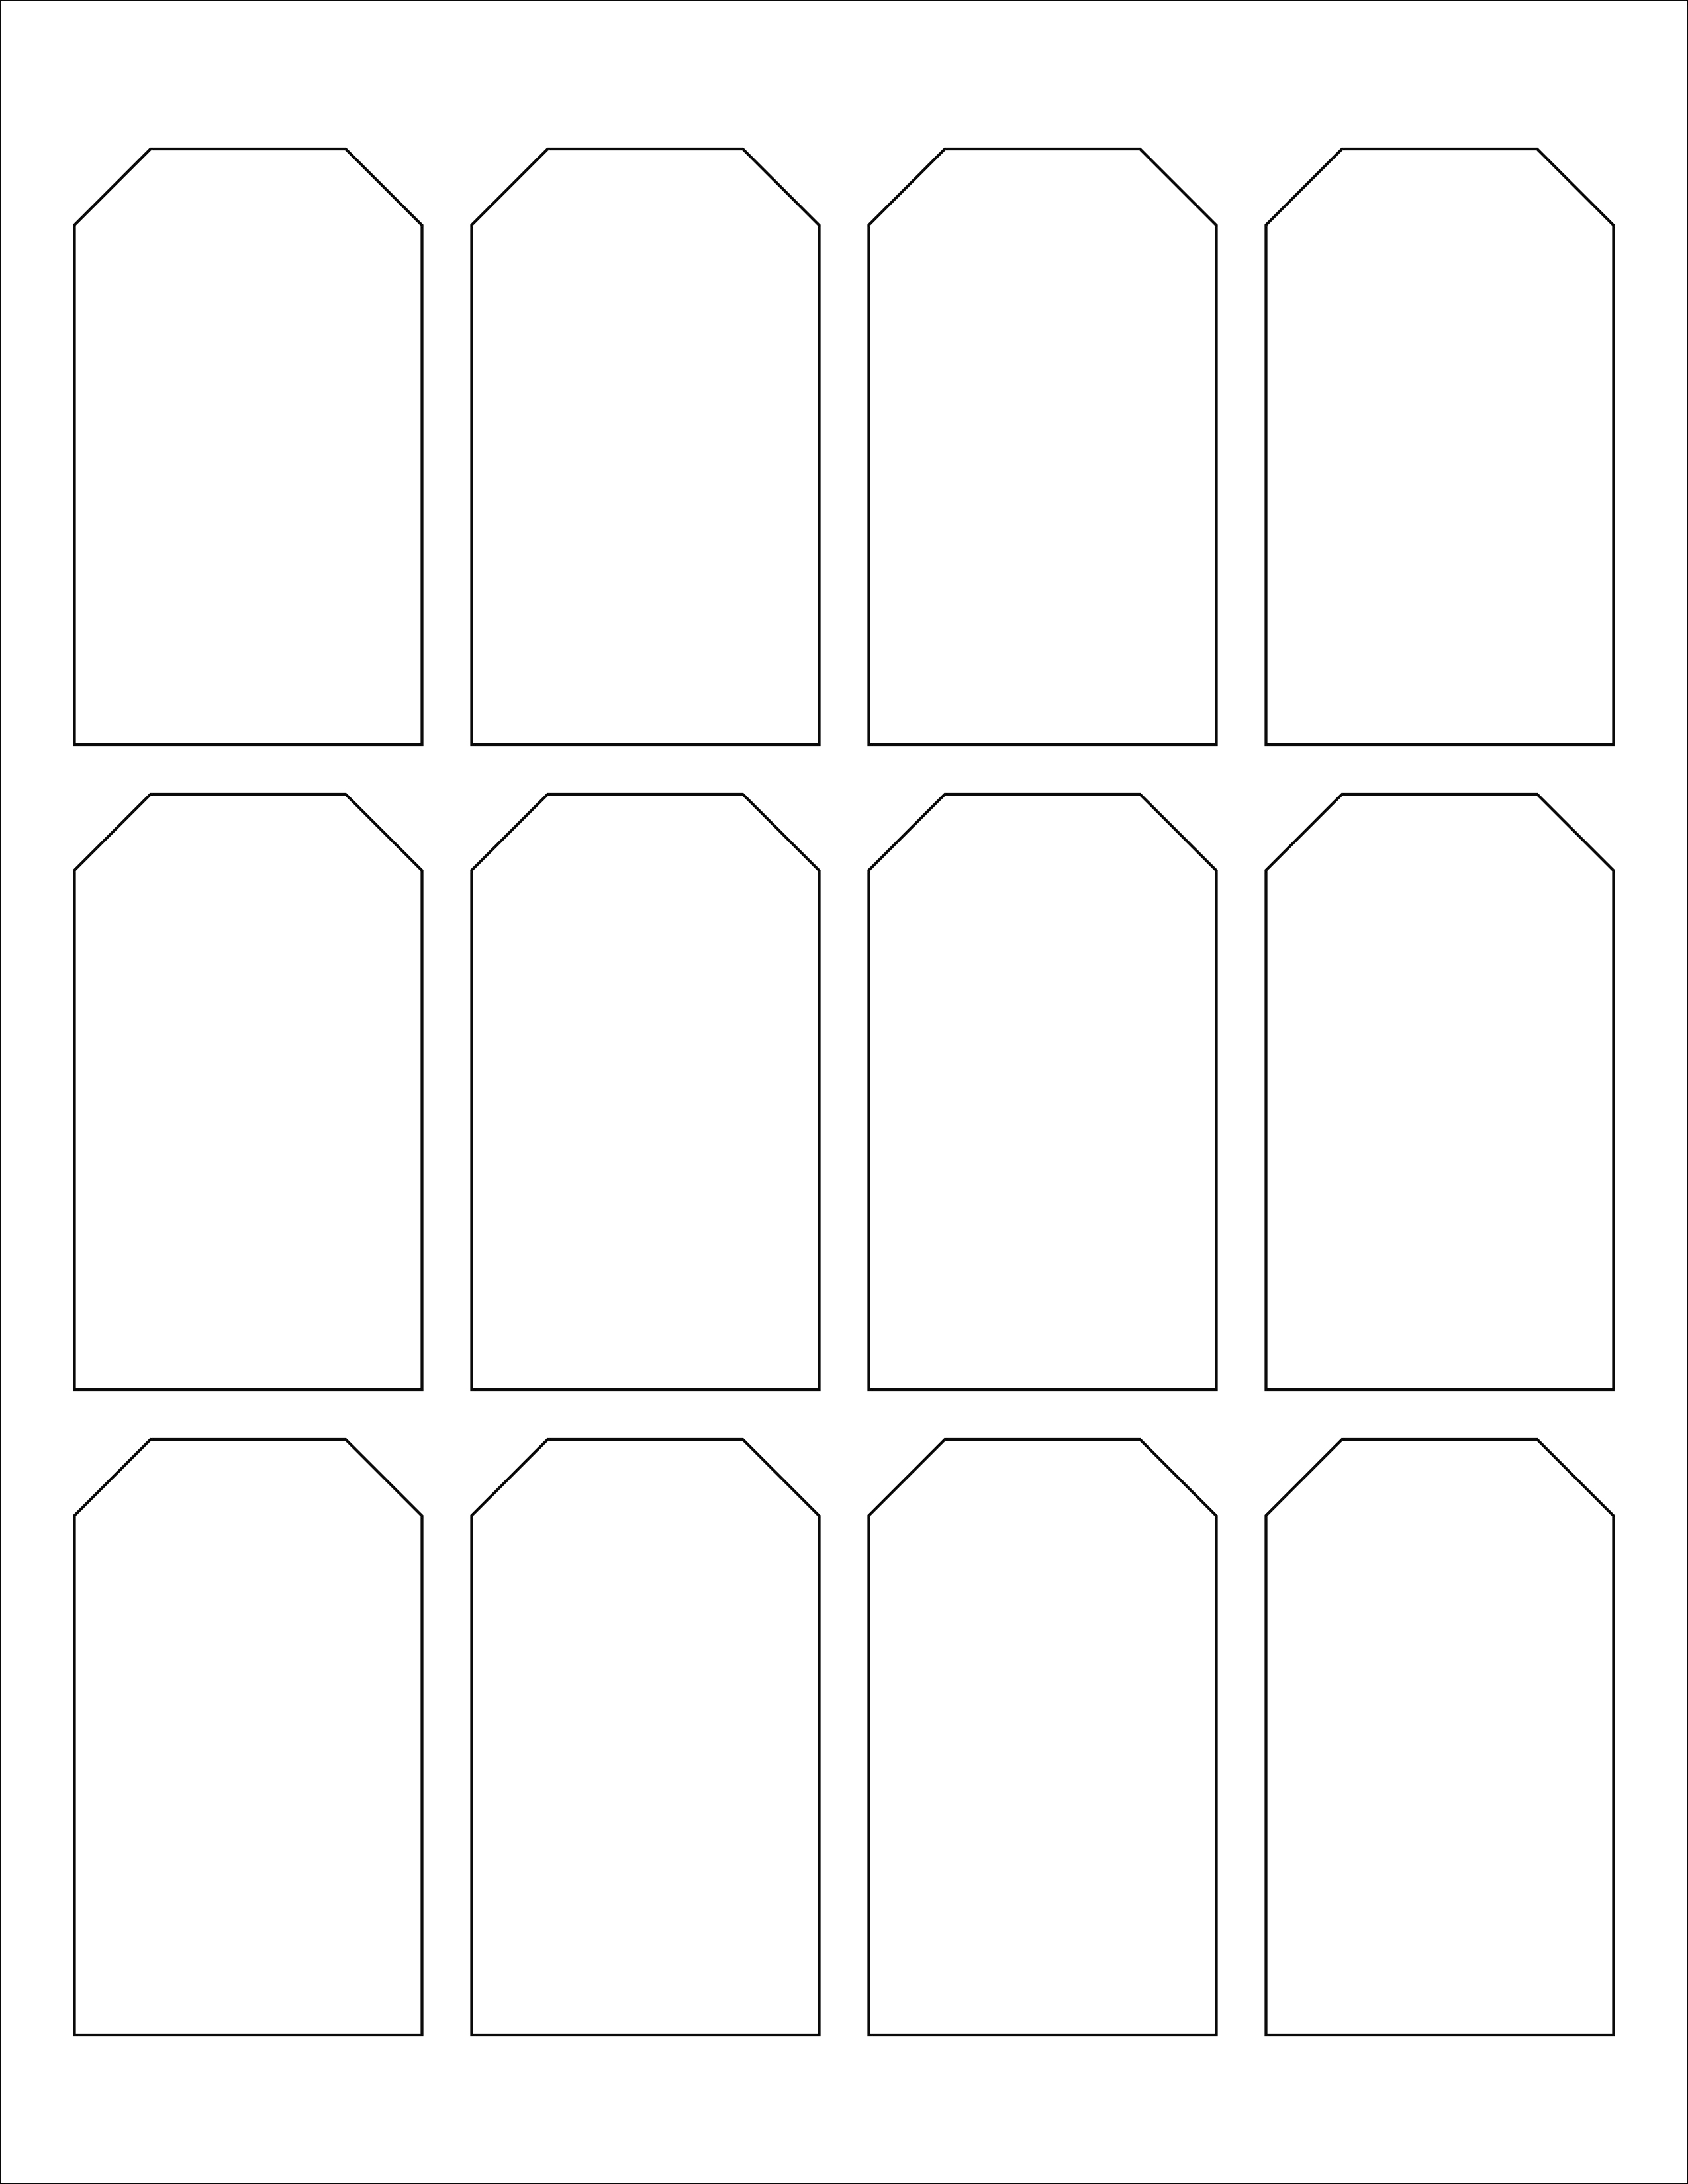 Hang Tag Label Template 1 75 X 3 Inches Dashleigh Template Center